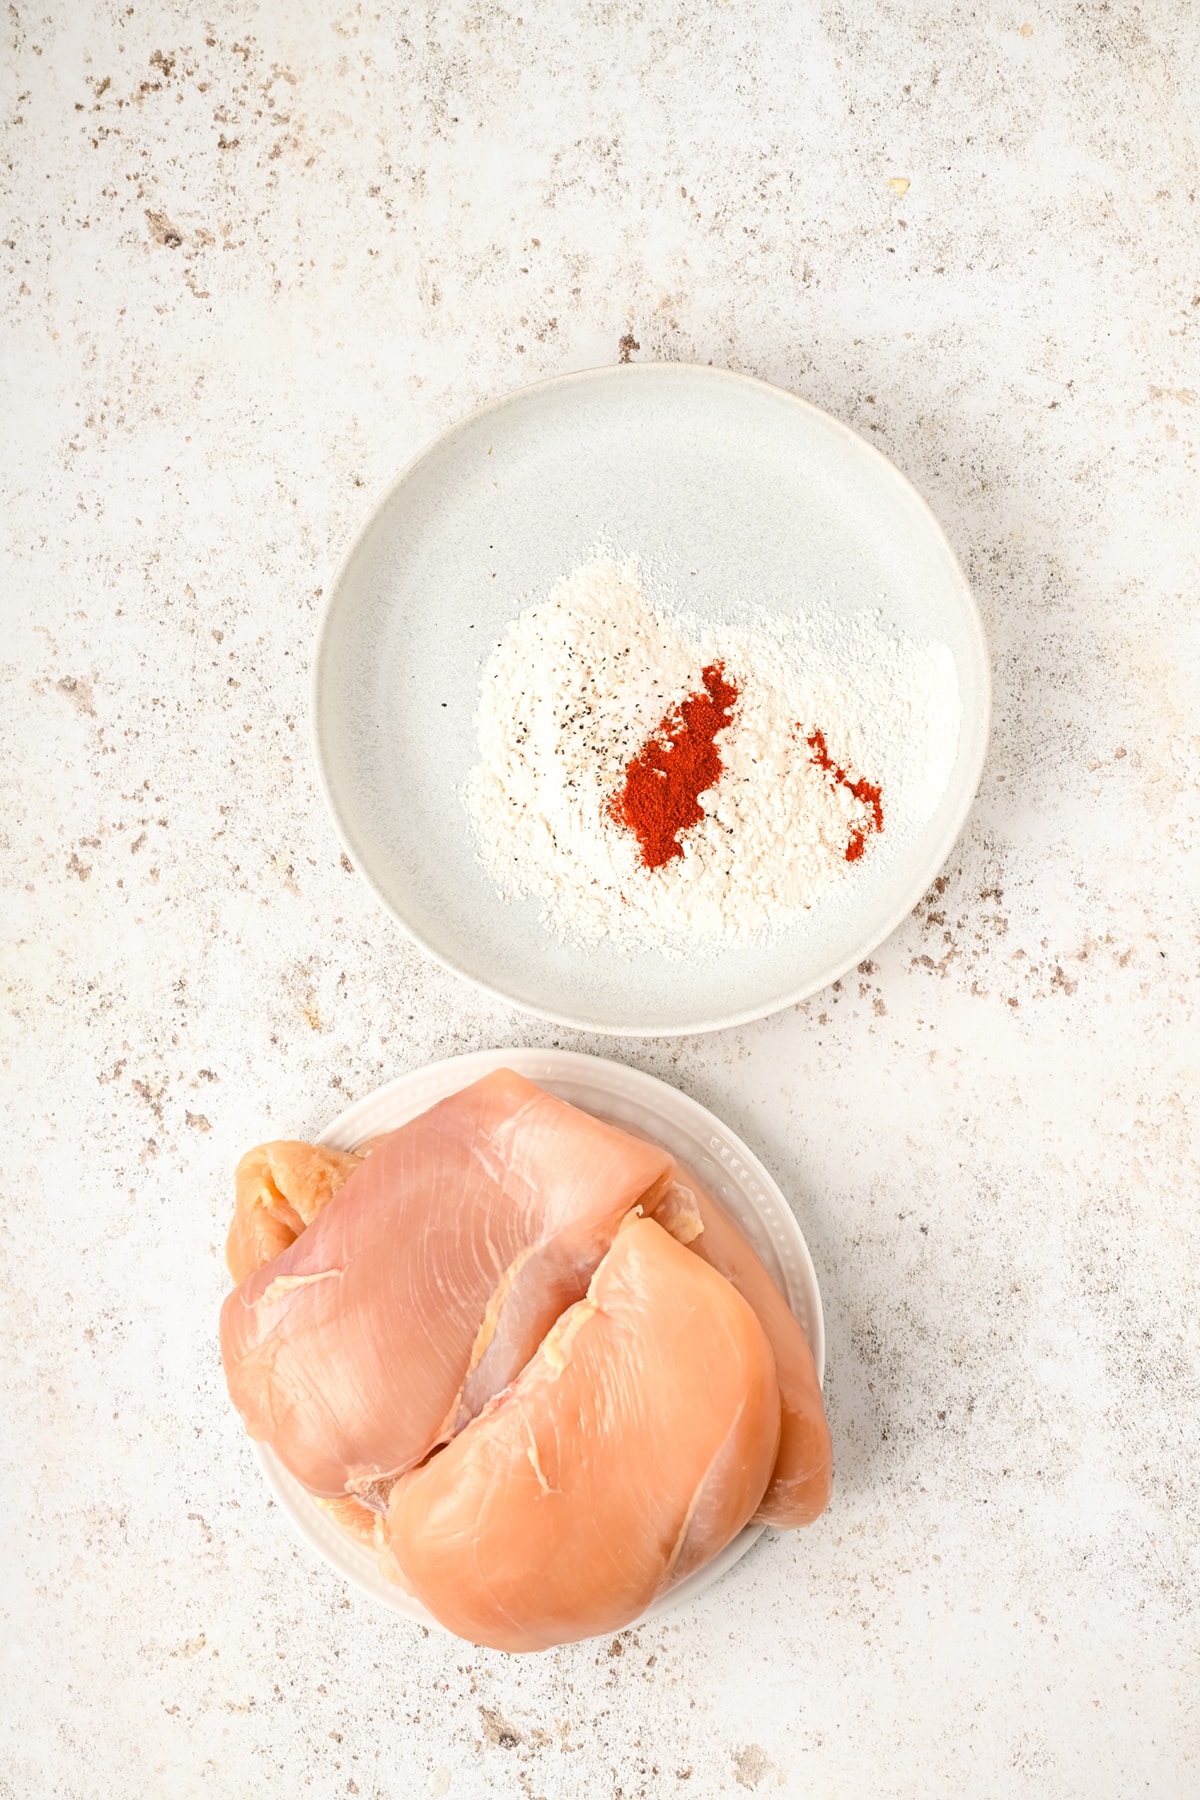 Chicken breast and a bowl of flour, paprika, salt, and pepper